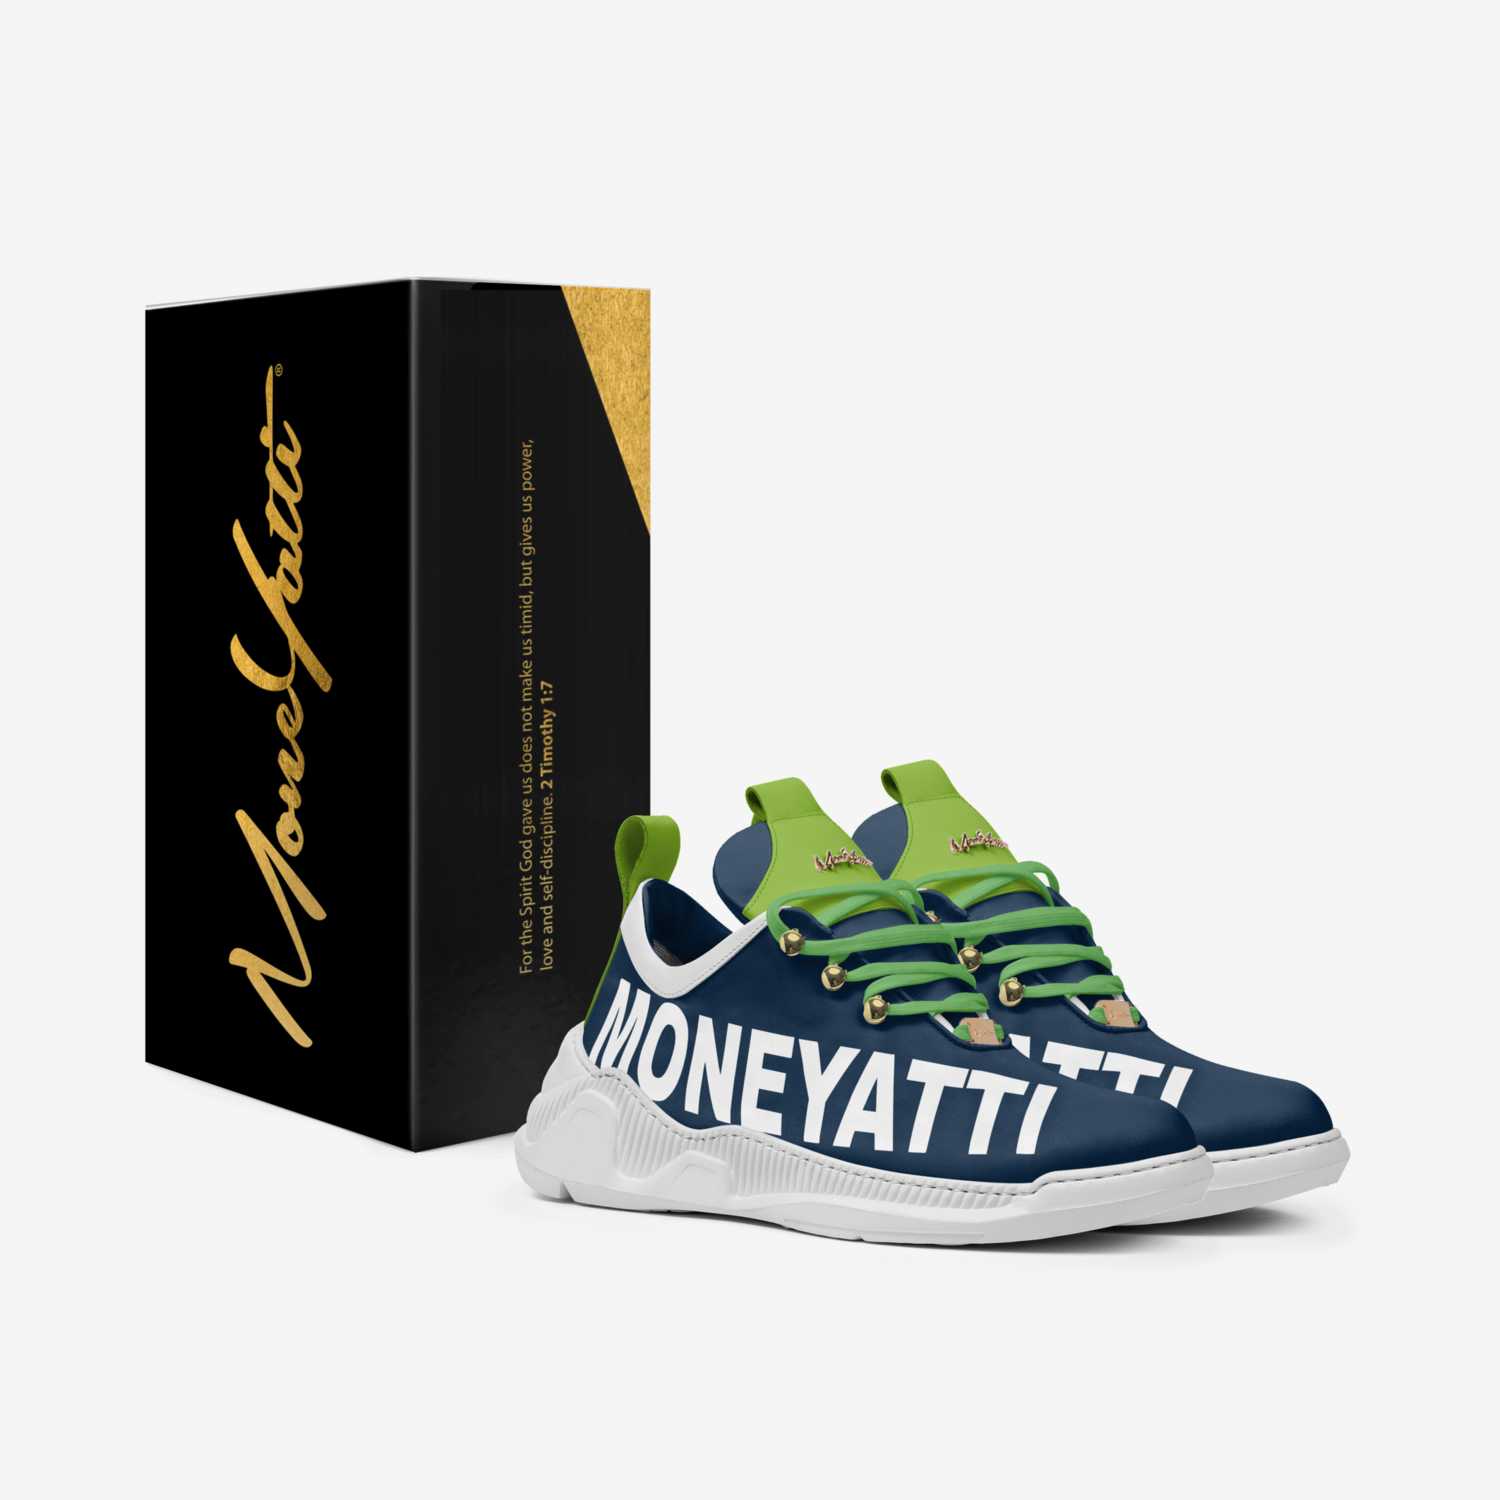 Sig18 custom made in Italy shoes by Moneyatti Brand | Box view